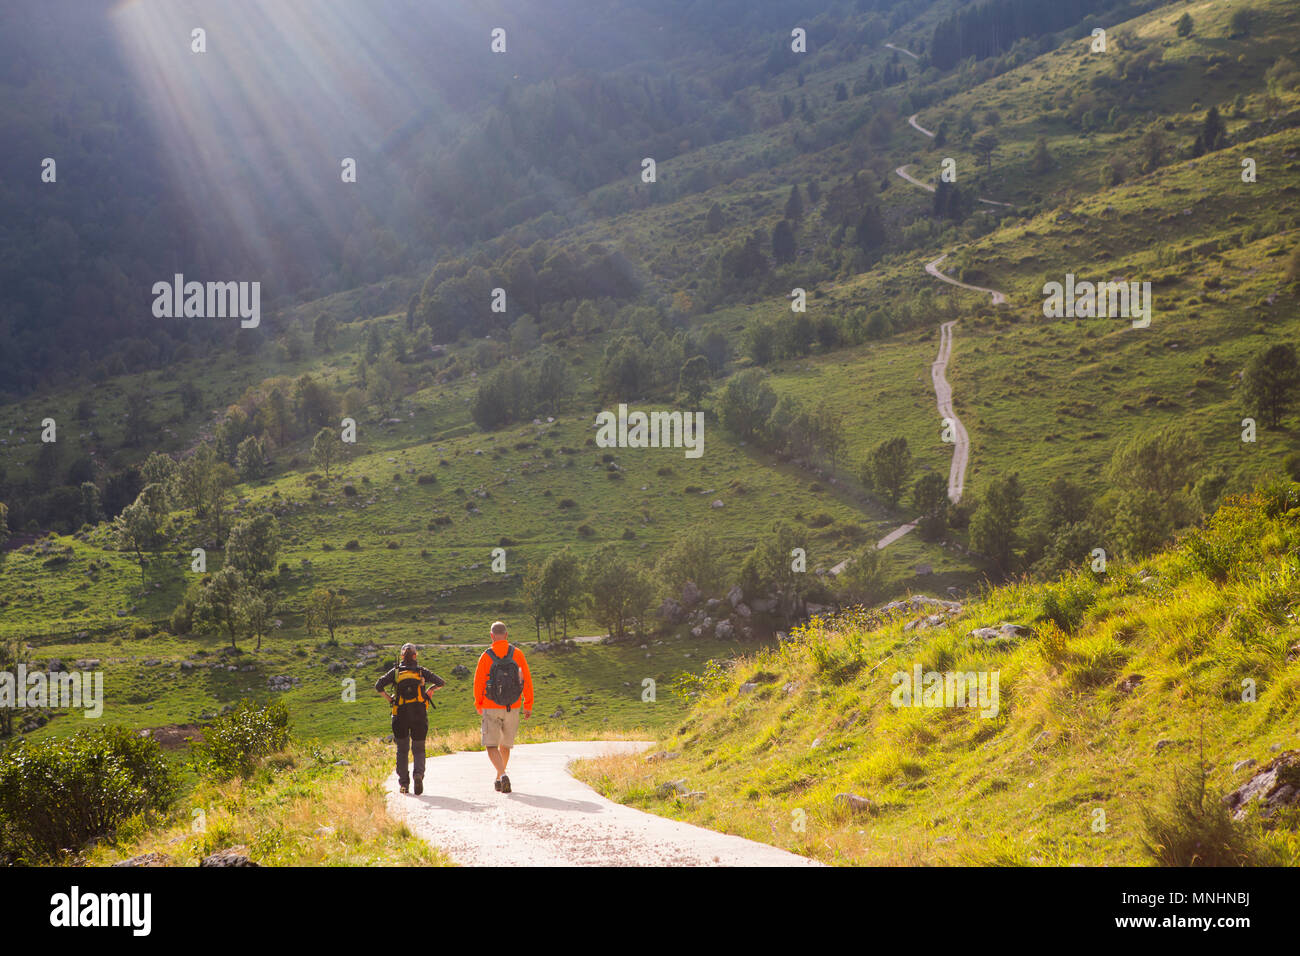 Landscape, with two hikers on their way down mount Krn, hit by last sun rays of day, Triglav, Slovenia Stock Photo